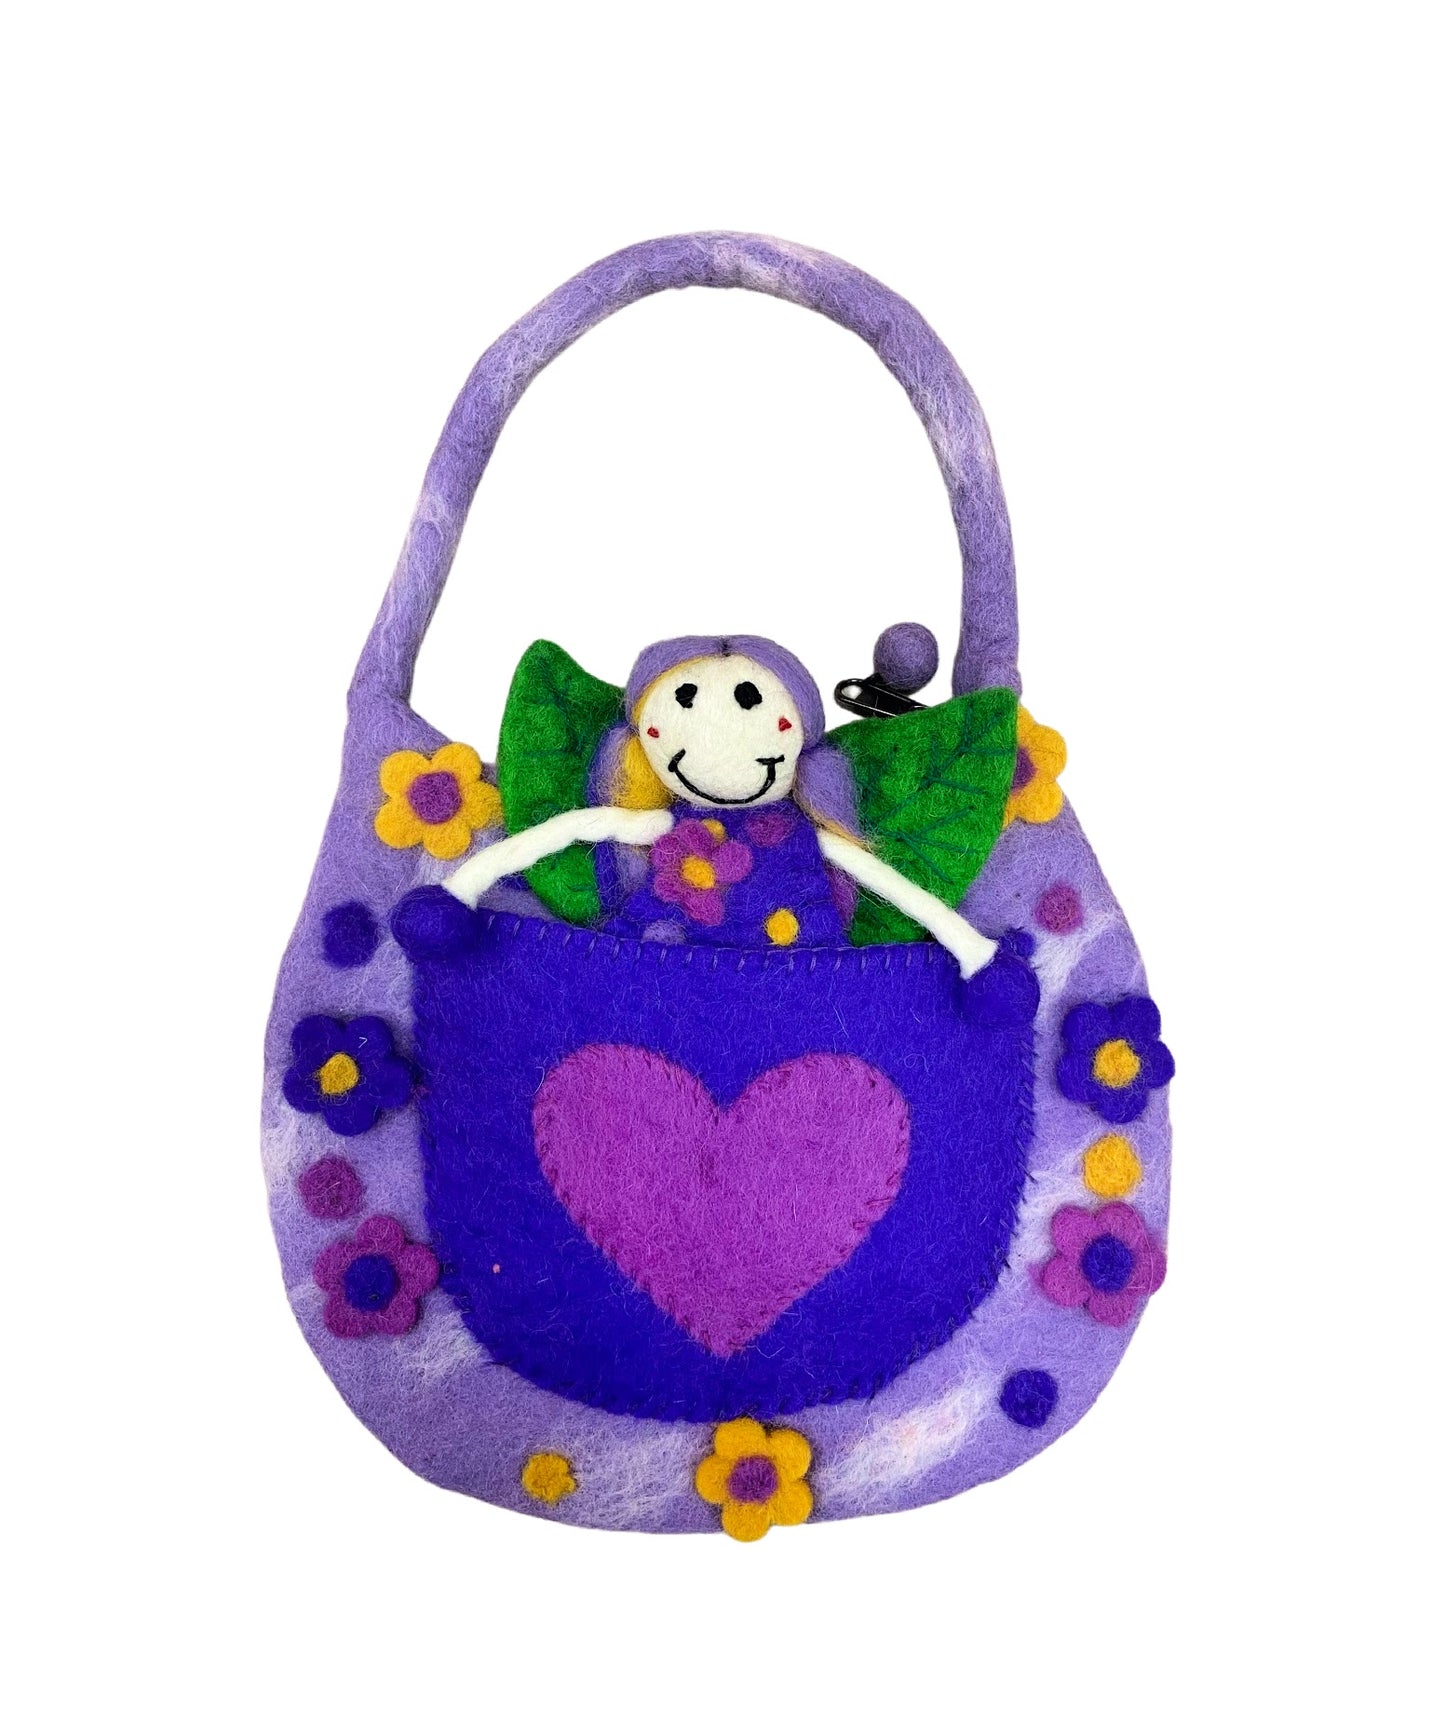 Purple felted bag for toddlers with a large heart in the middle and comes with a doll